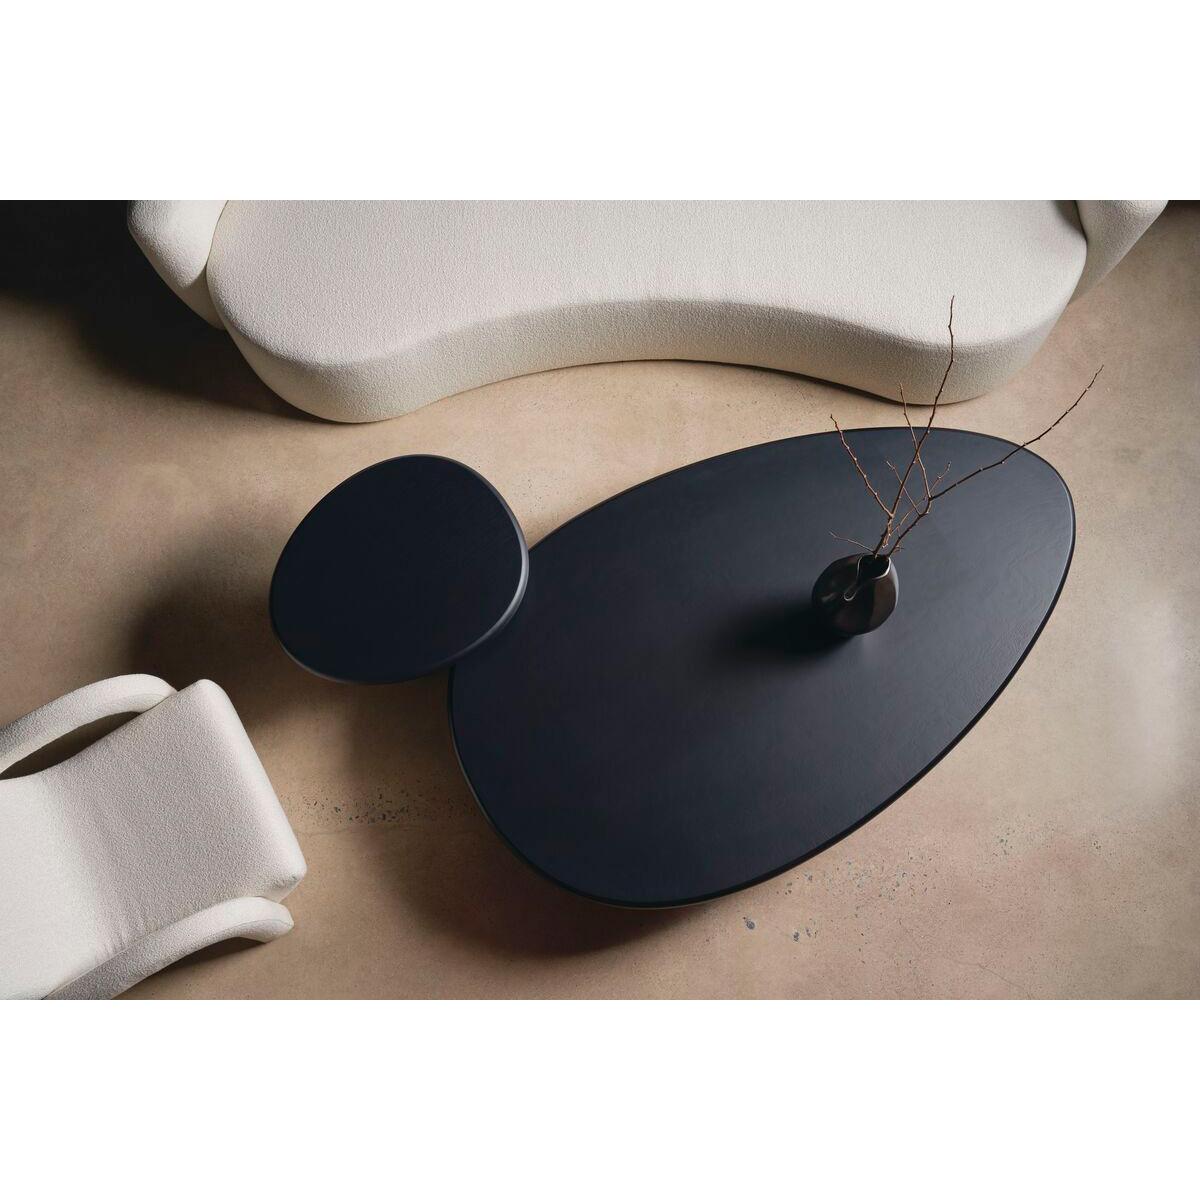 Effortless and organic, the table makes an elegant statement with its soft, pebble shape. Crafted from Tamo ash wood veneers in a dramatic dark coal finish, its fluid form features an expansive tabletop balanced on a uniquely shaped, asymmetrical